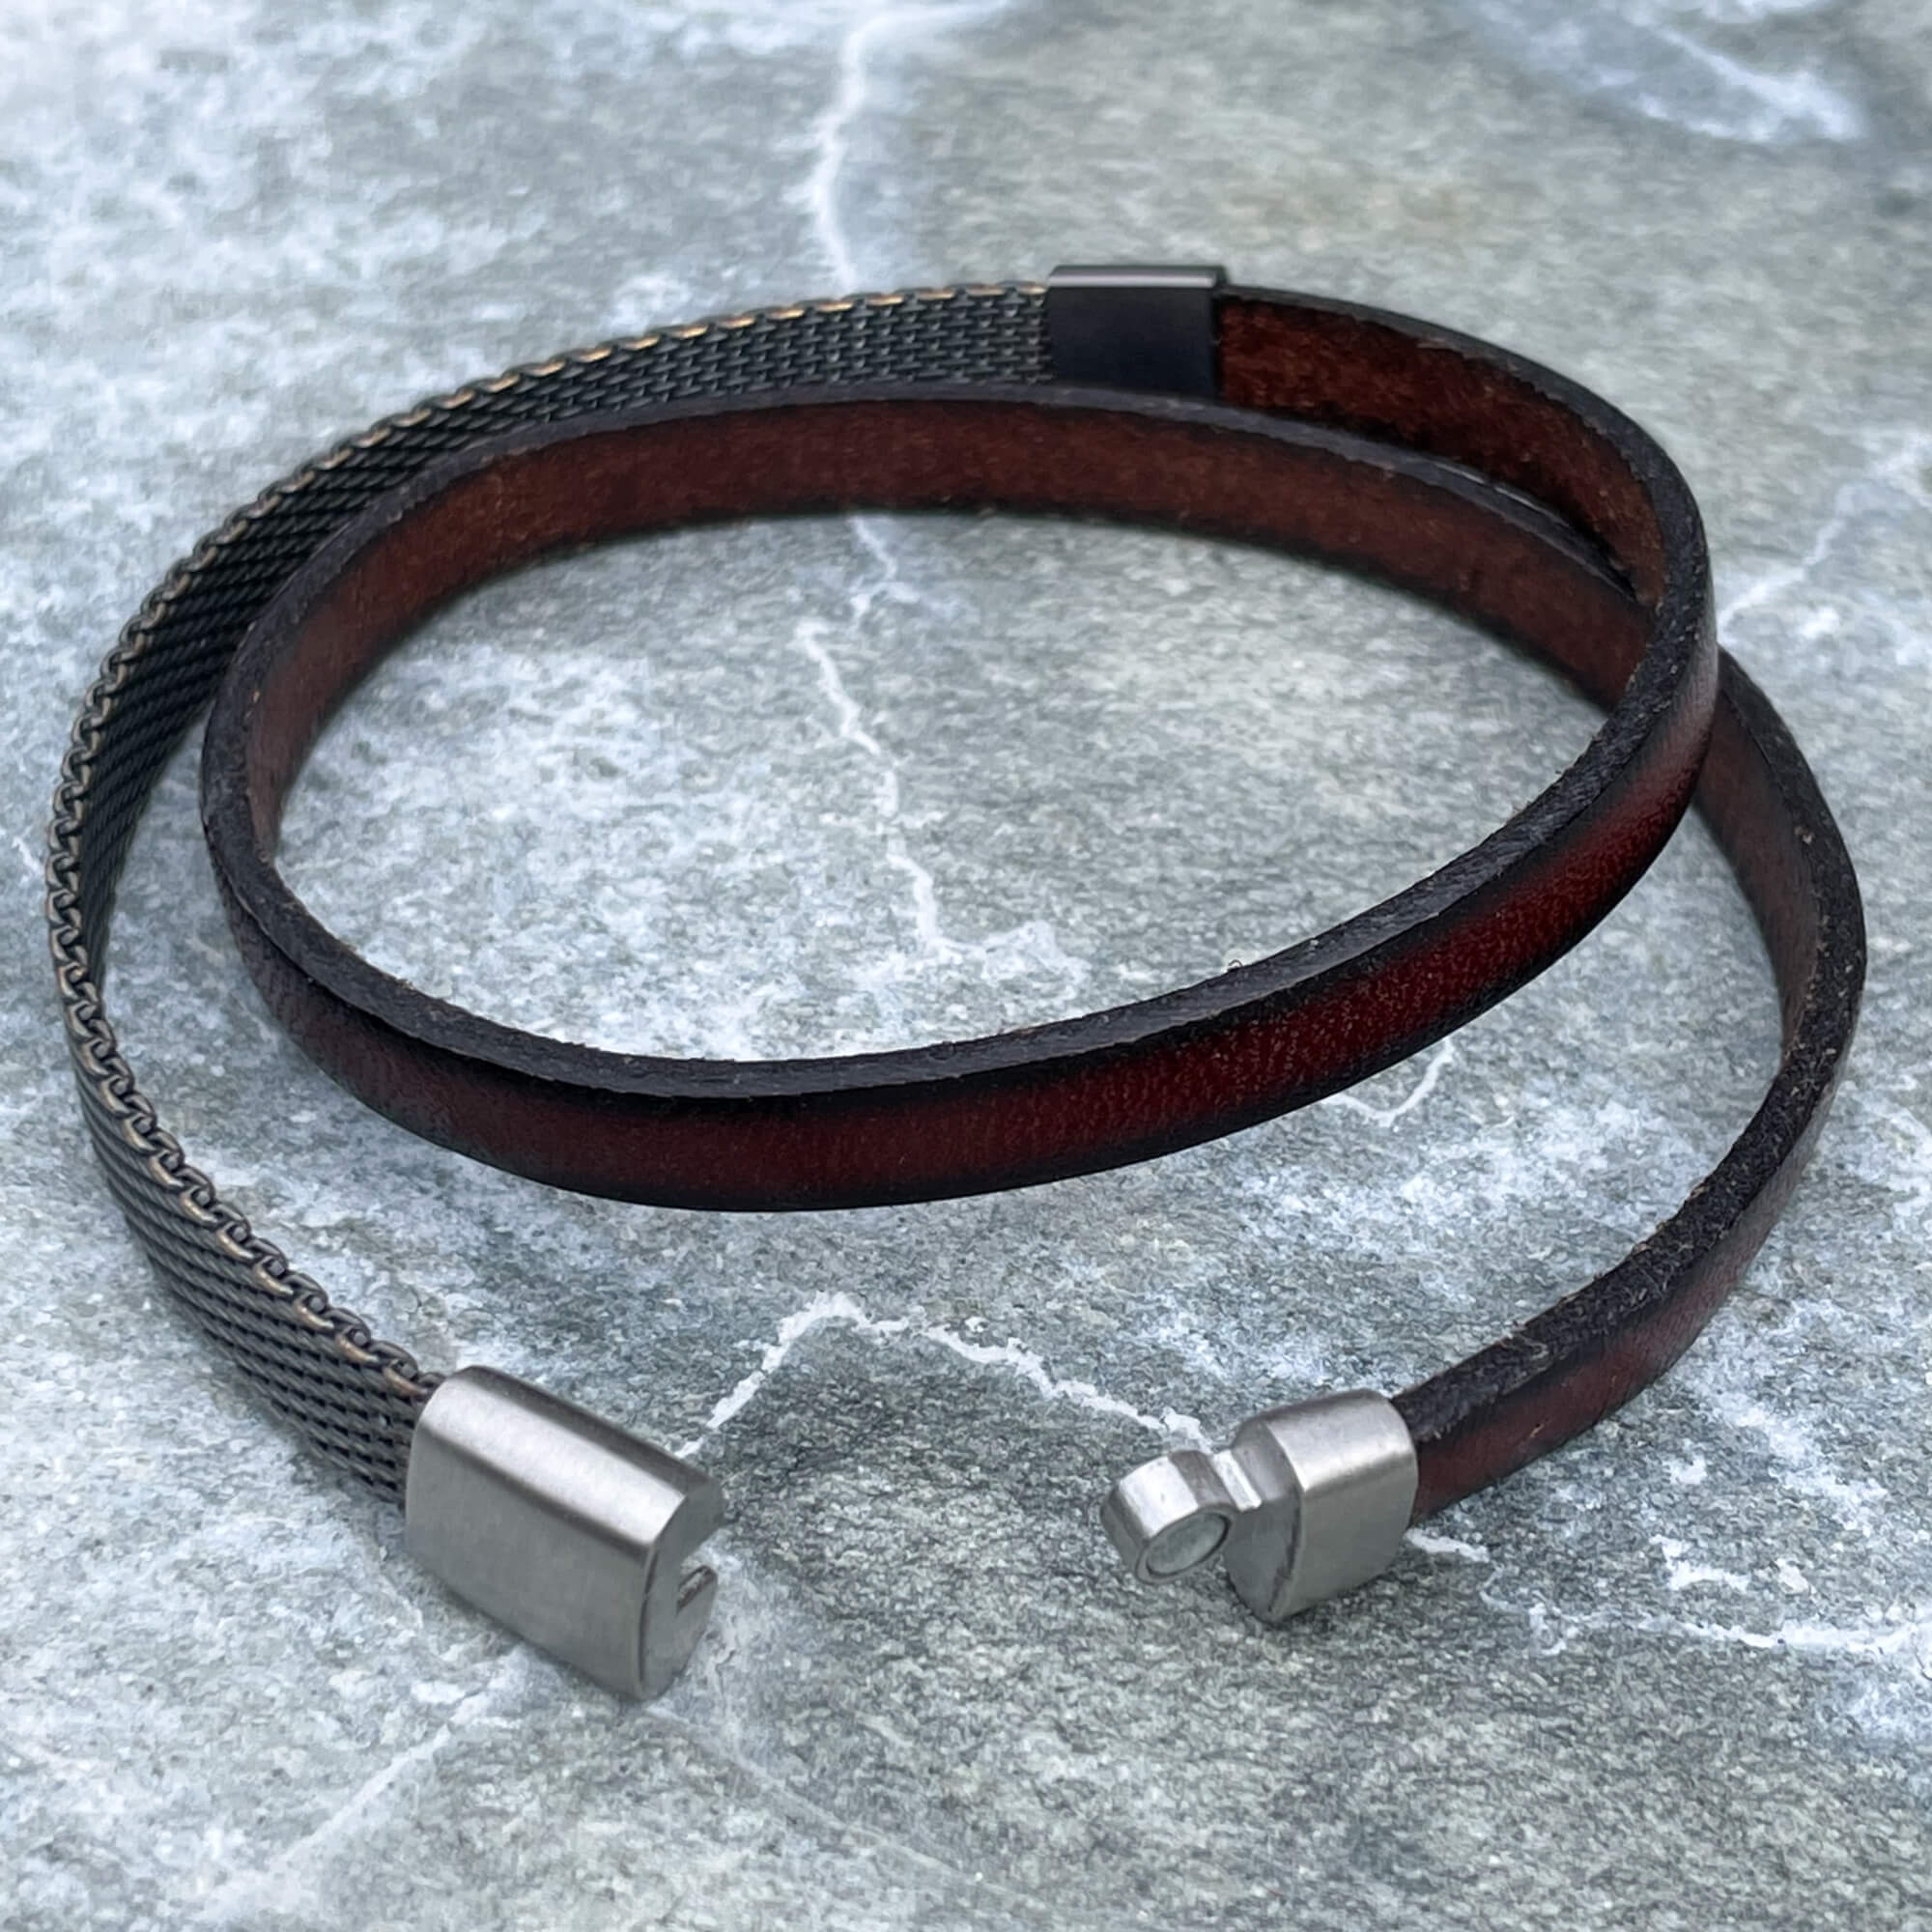 Brown leather double bracelet with braided stainless steel accent